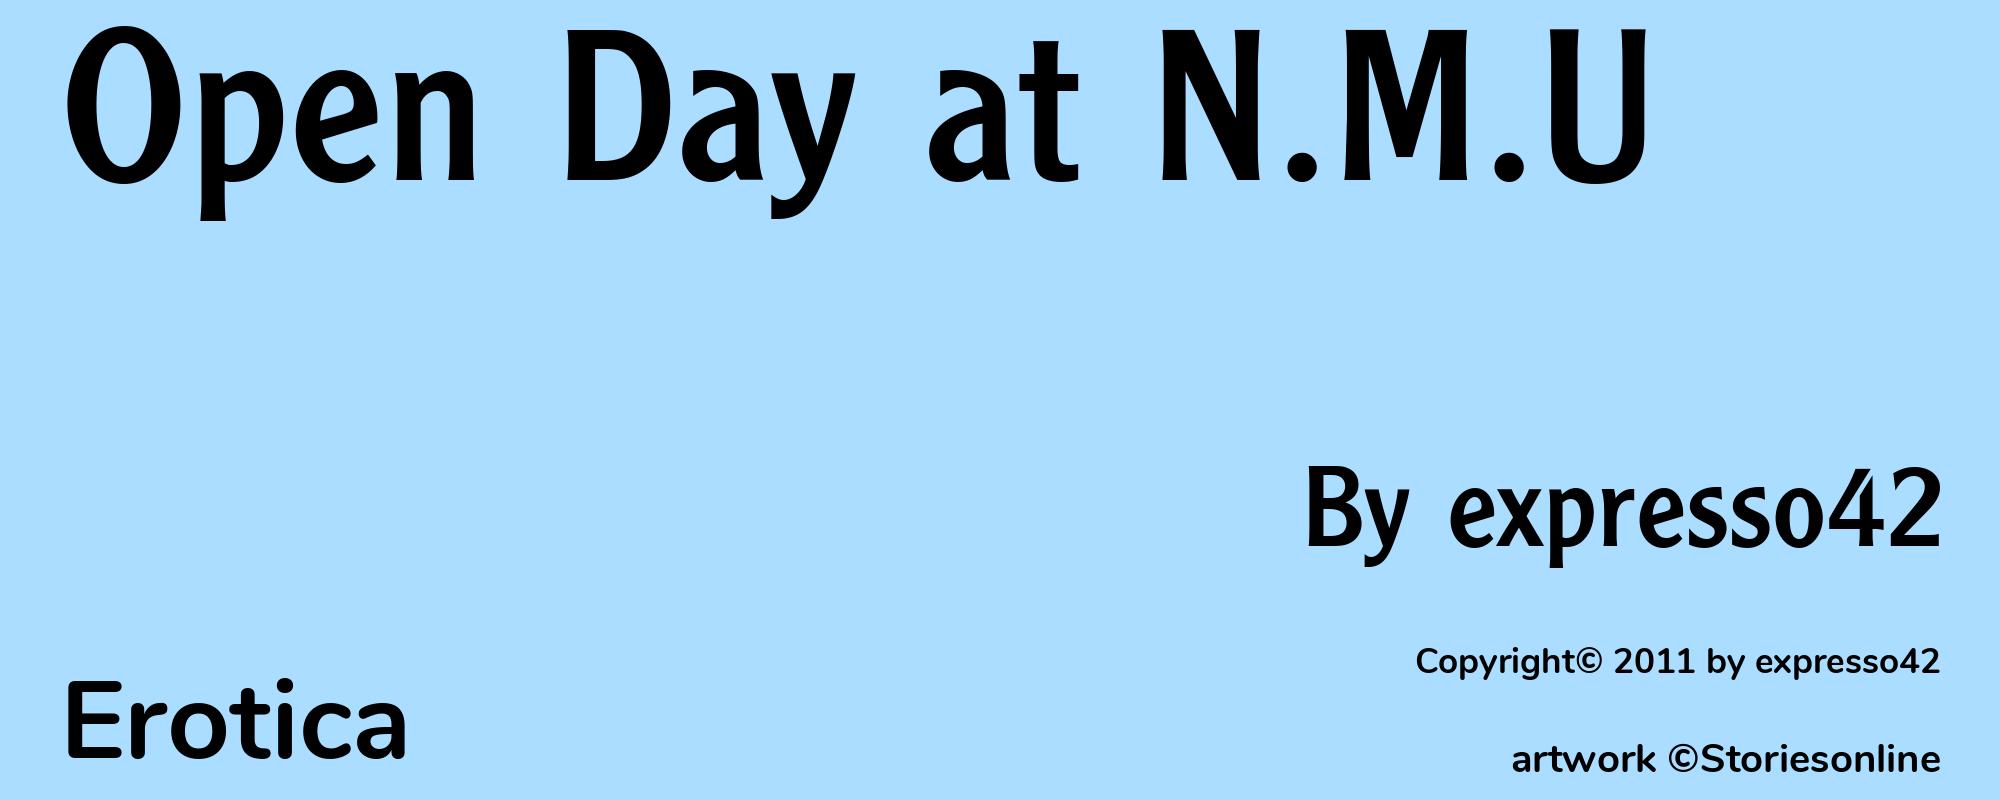 Open Day at N.M.U - Cover